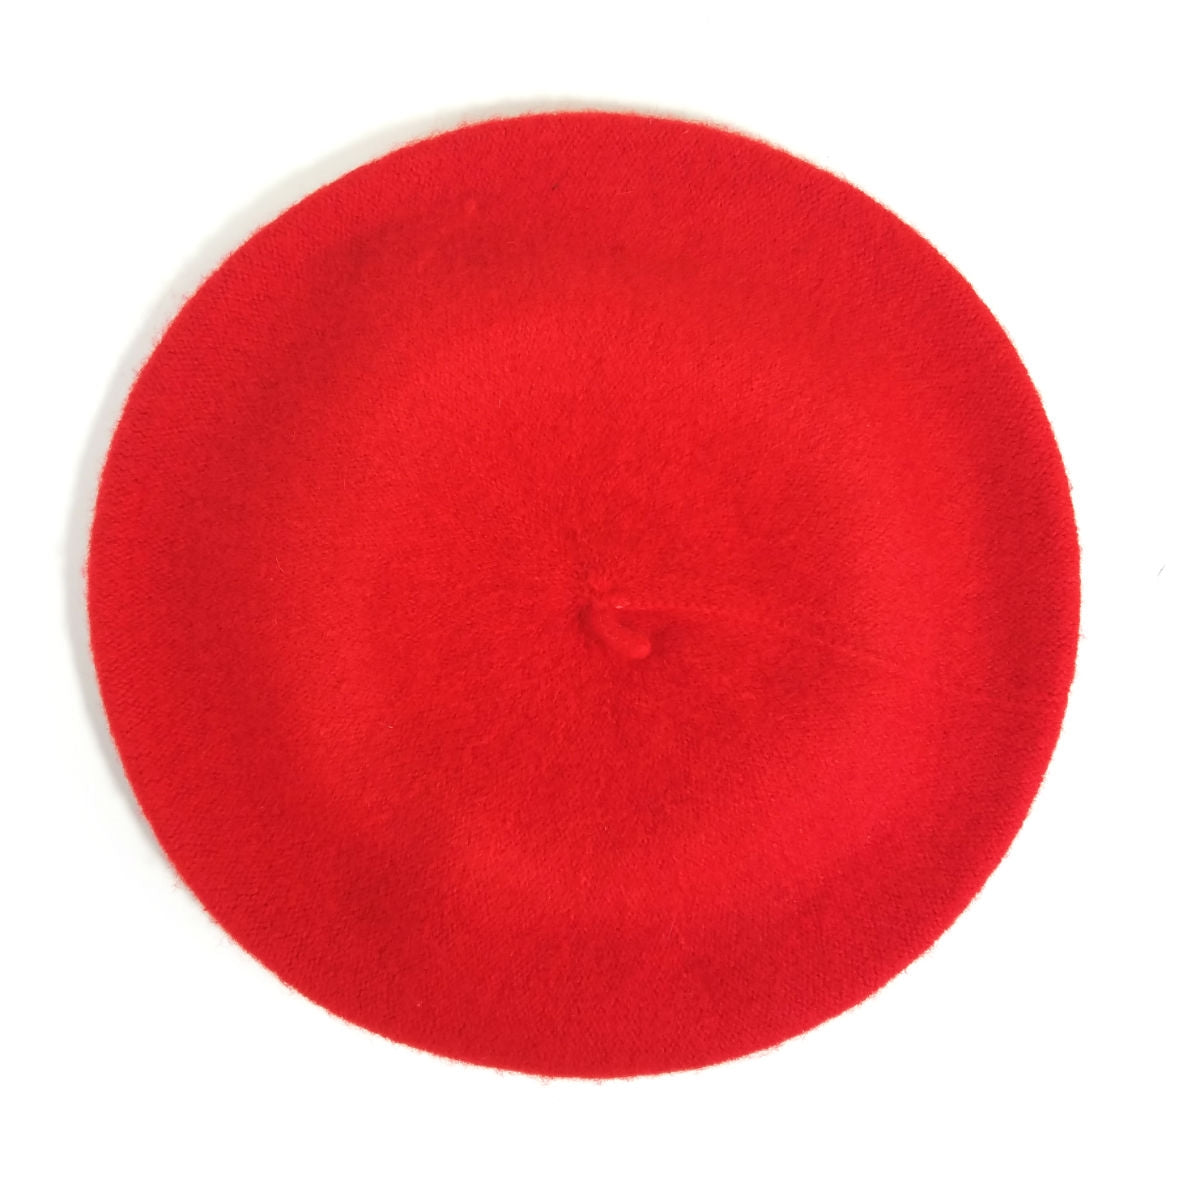 11" diameter "French" style wool blend knit beret in solid bright red